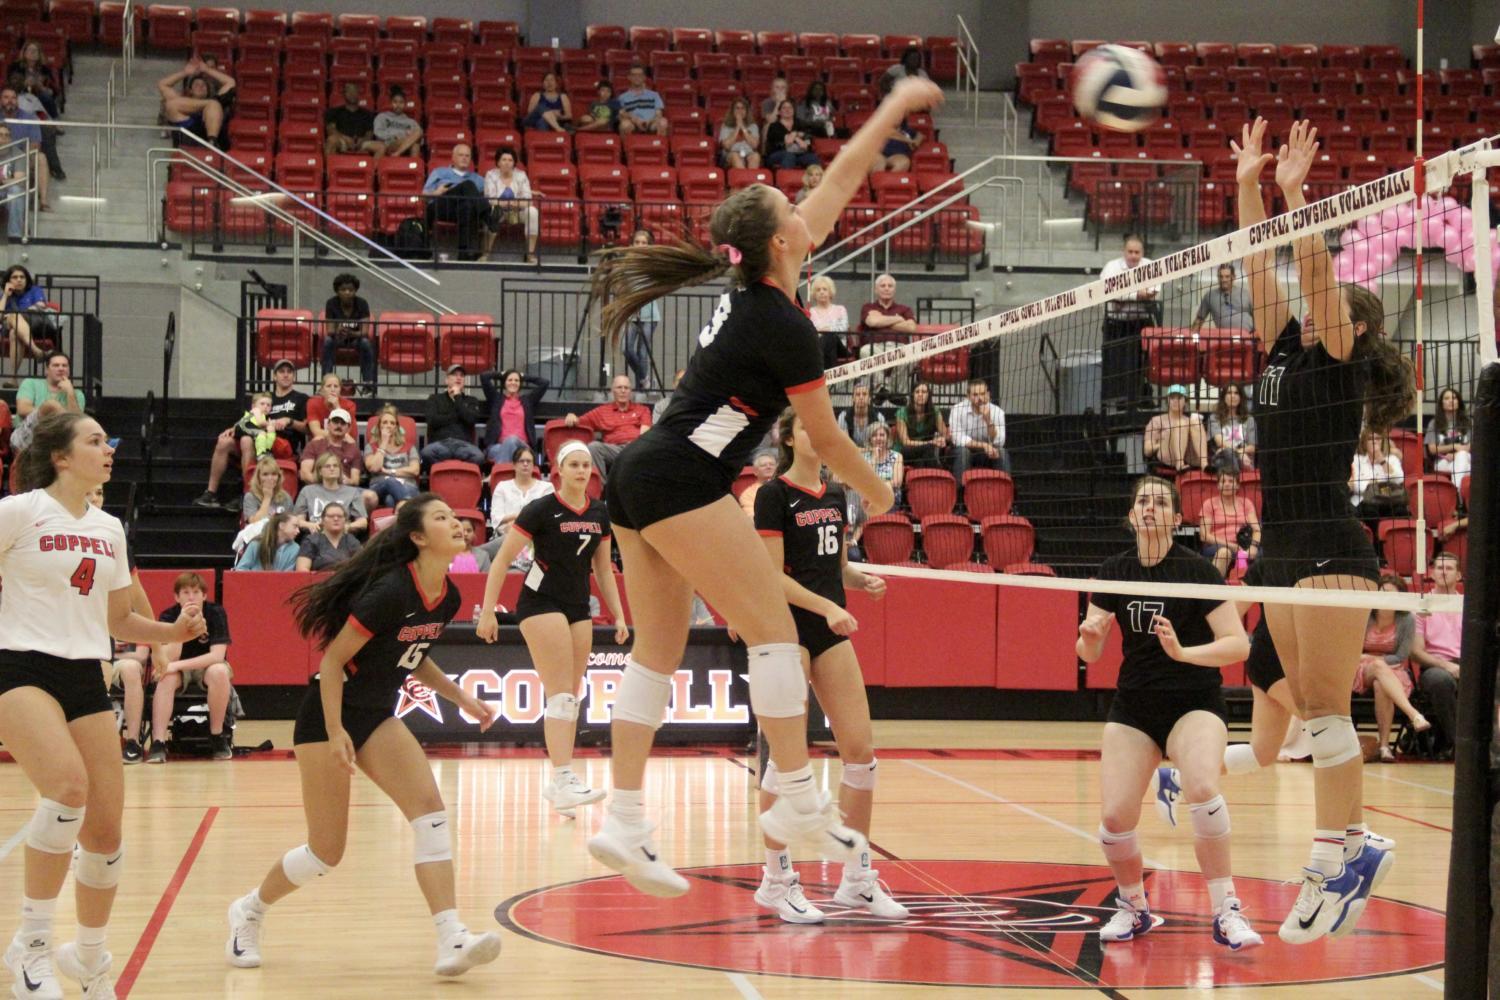 Coppell+High+School+senior+Breanne+Chausse+right+front+spikes+the+ball+during+the+match+at+the+Coppell+High+School+Arena+against+Pearce+on+Tuesday+night.+The+Cowgirls+defeated+the+Lady+Mustangs%2C+25-21%2C+25-23%2C+24-26%2C+25-14%2C+in+their+first+home+district+game.